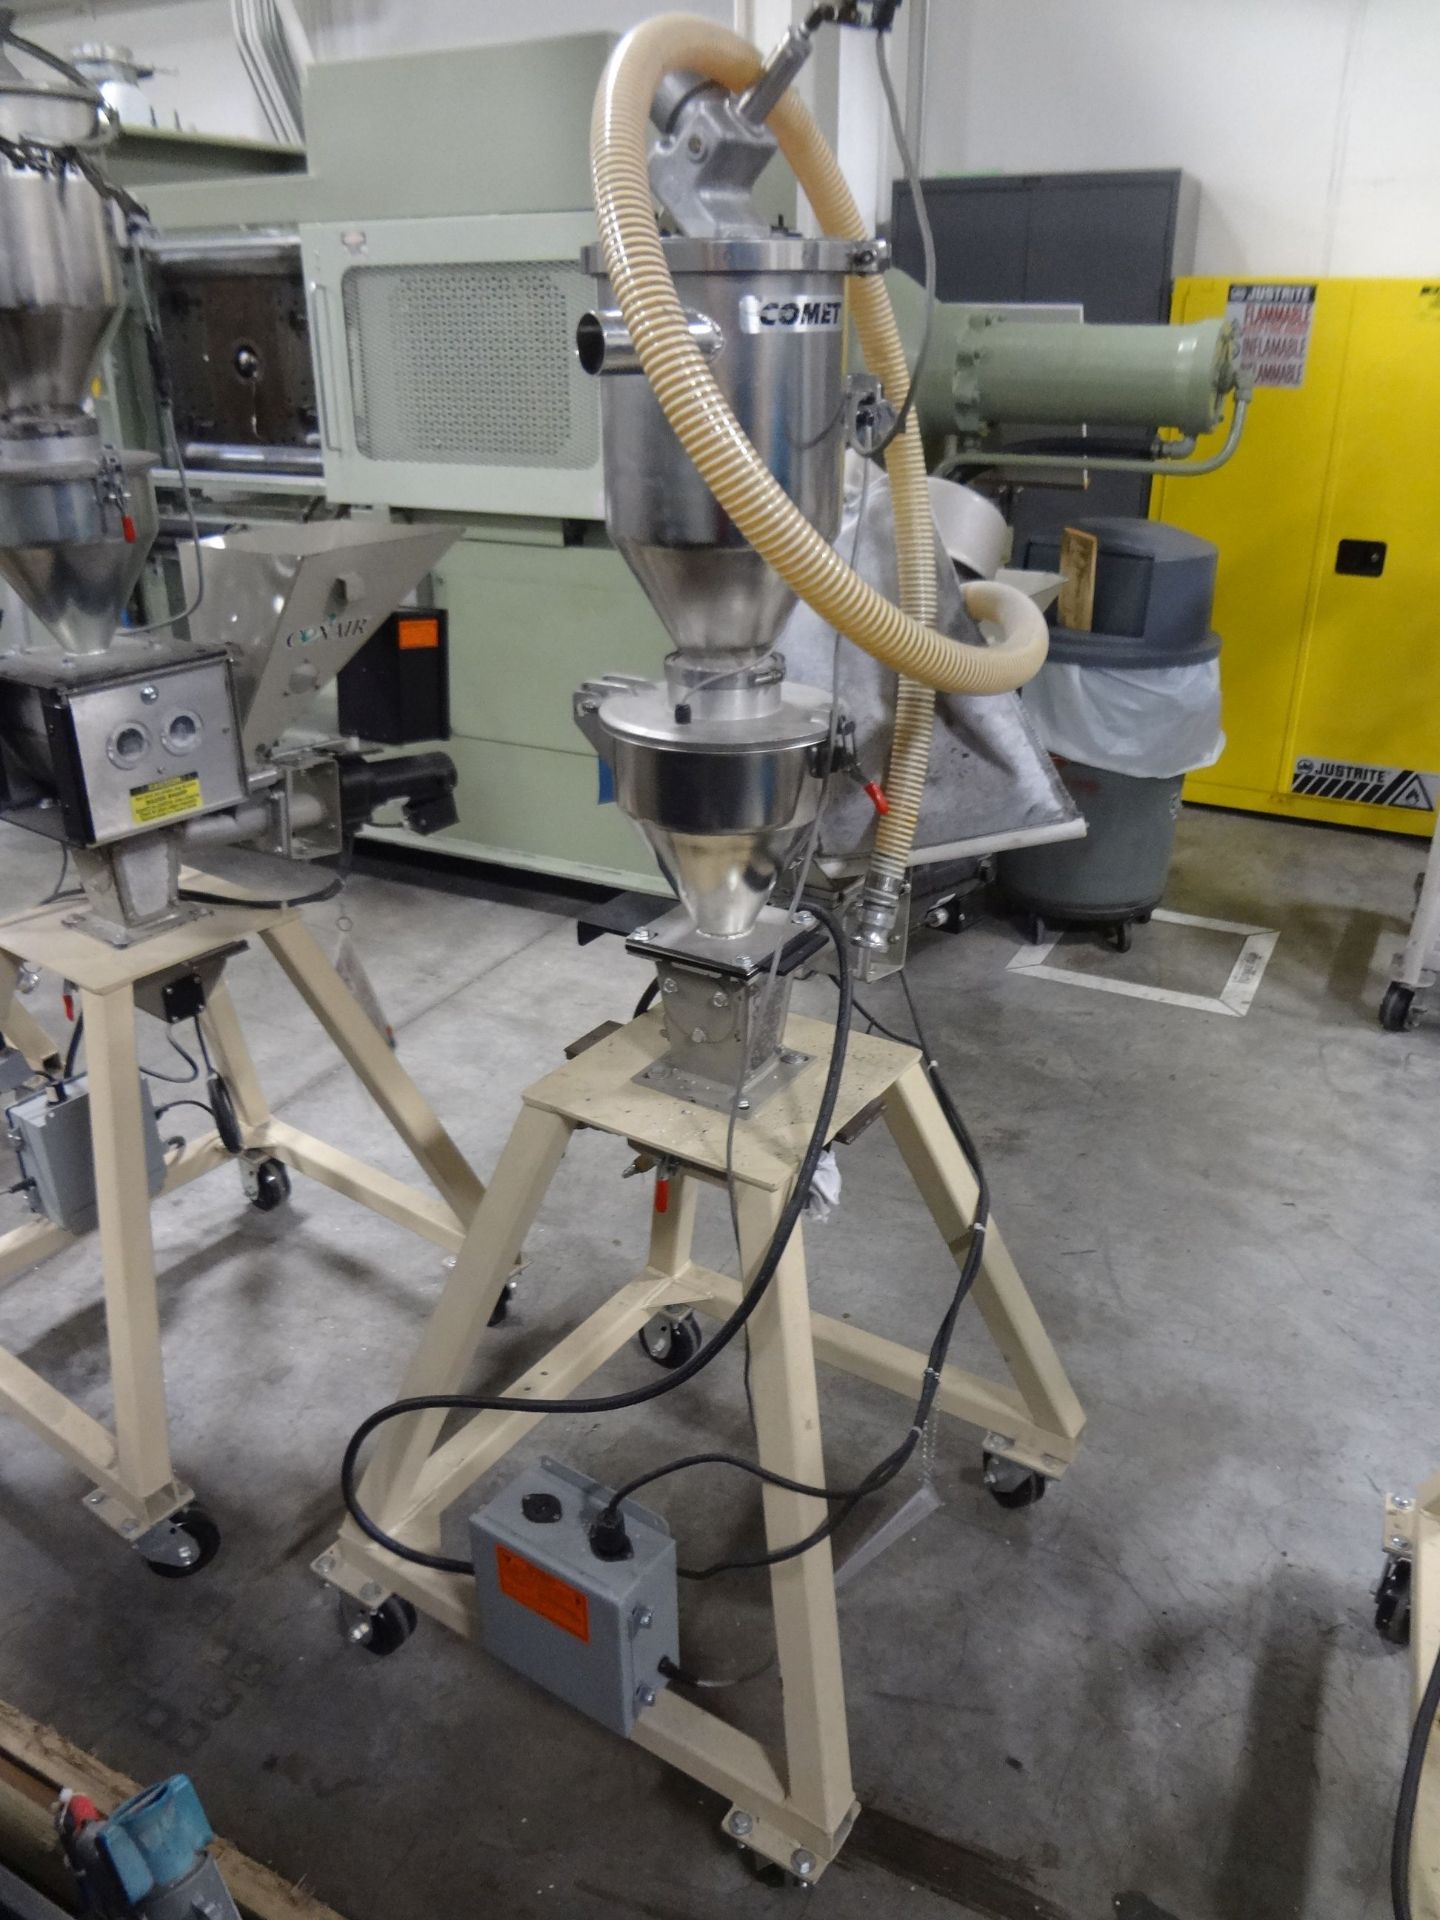 CONAIR BFO ADDITIVE FEEDER, COMET VACUUM FEEDER ON STAND WITH CASTERS - Image 3 of 8